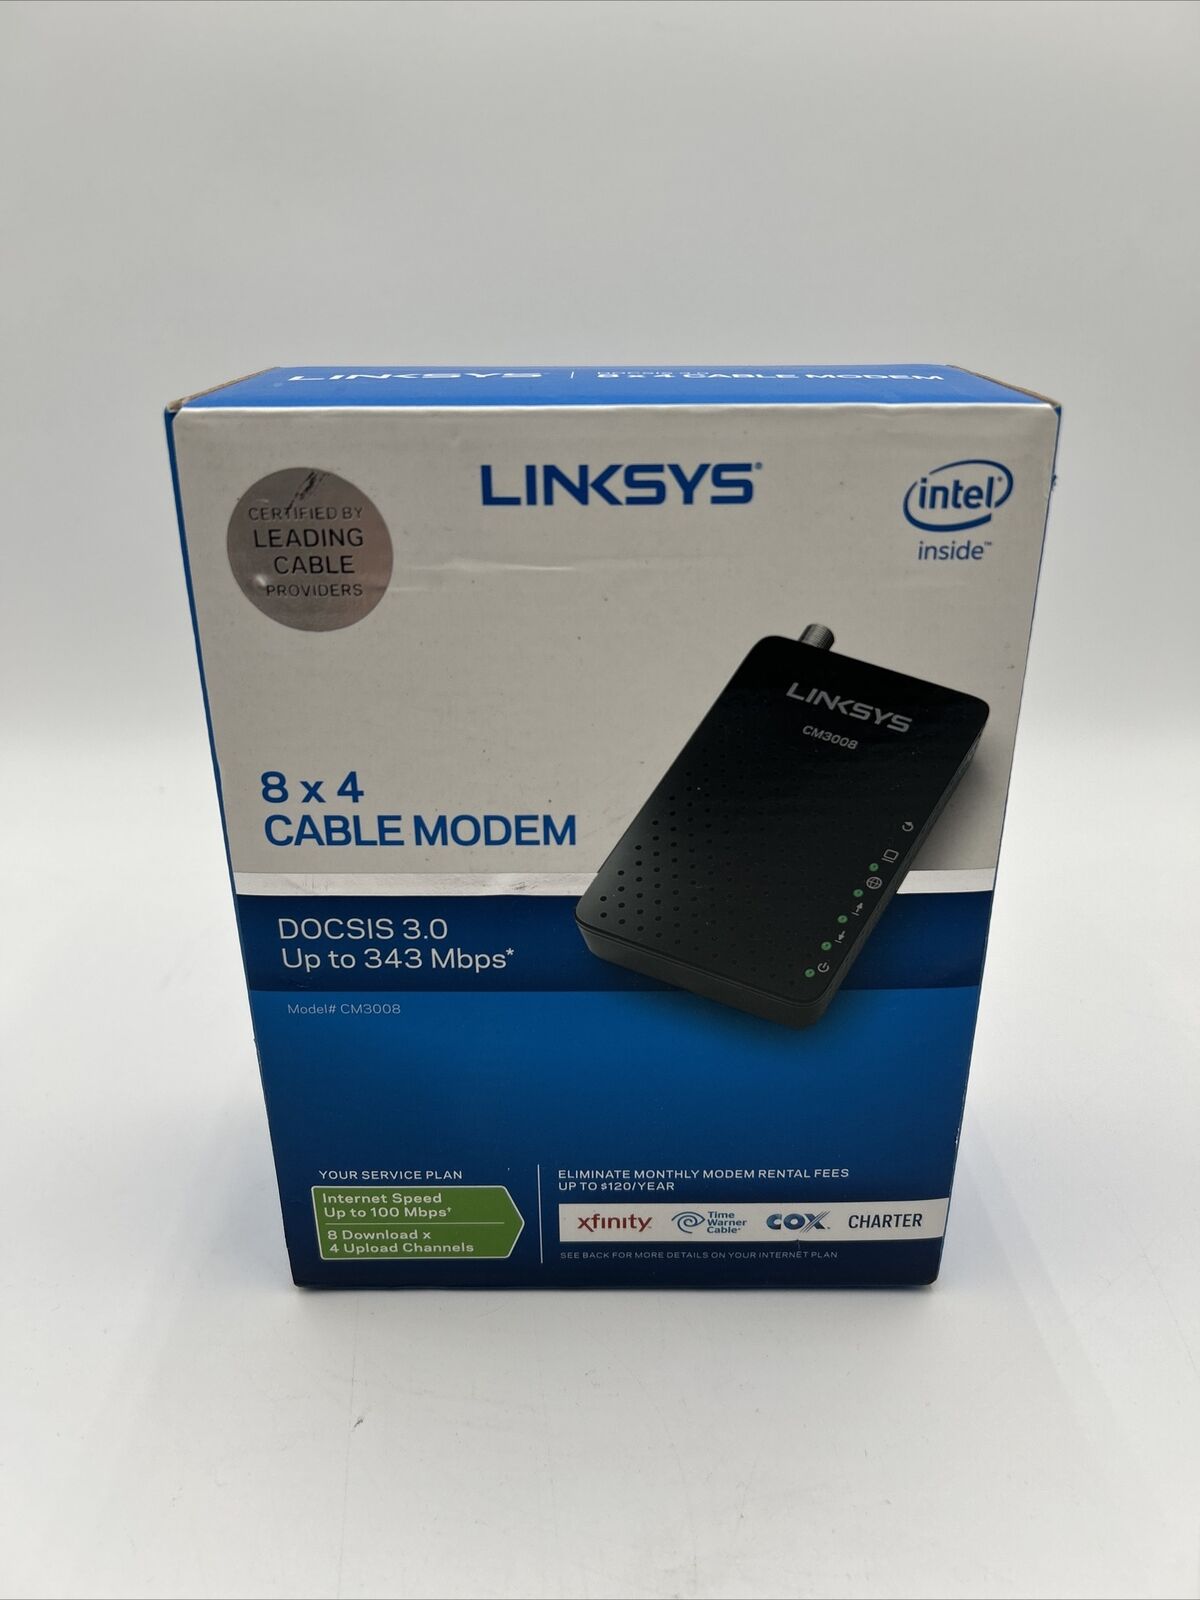 Linksys Model CM3008 Cable Modem DOCSIS 3.0 Bonded Channels Up To 343 Mbps *NEW*